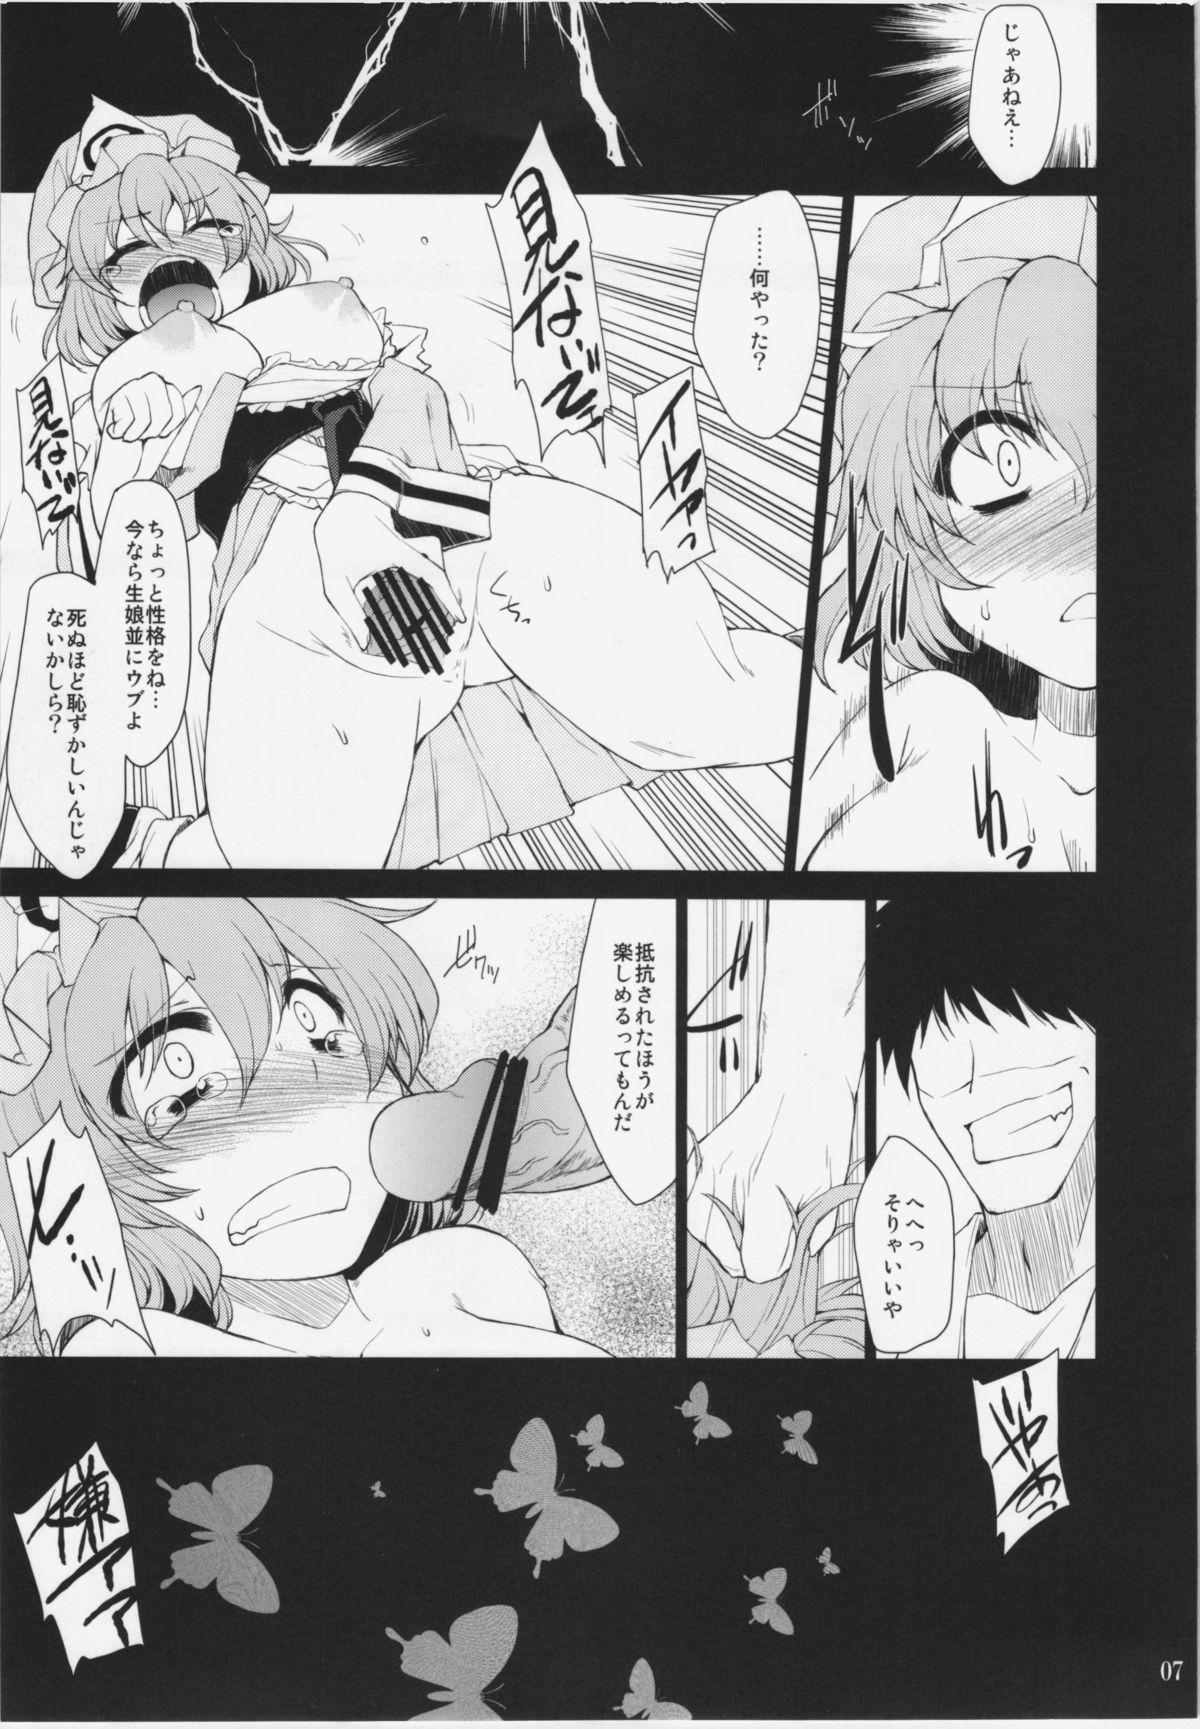 Hiddencam GHOST BUSTERS - Touhou project Marido - Page 5